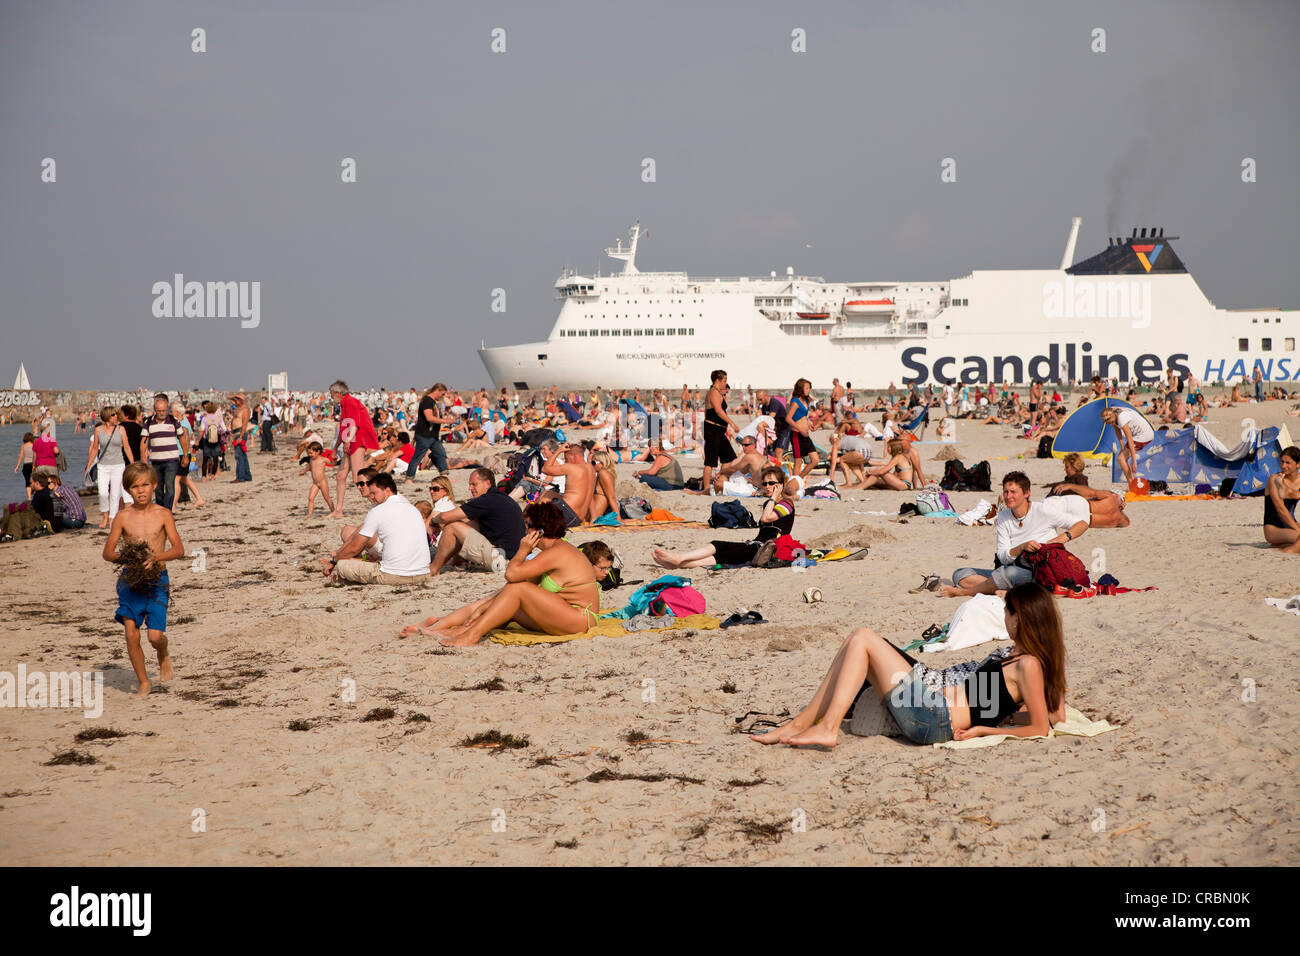 Scandlines ferry and the crowded beach of Warnemuende on the Baltic Sea, Rostock, Mecklenburg-Western Pomerania, Germany, Europe Stock Photo